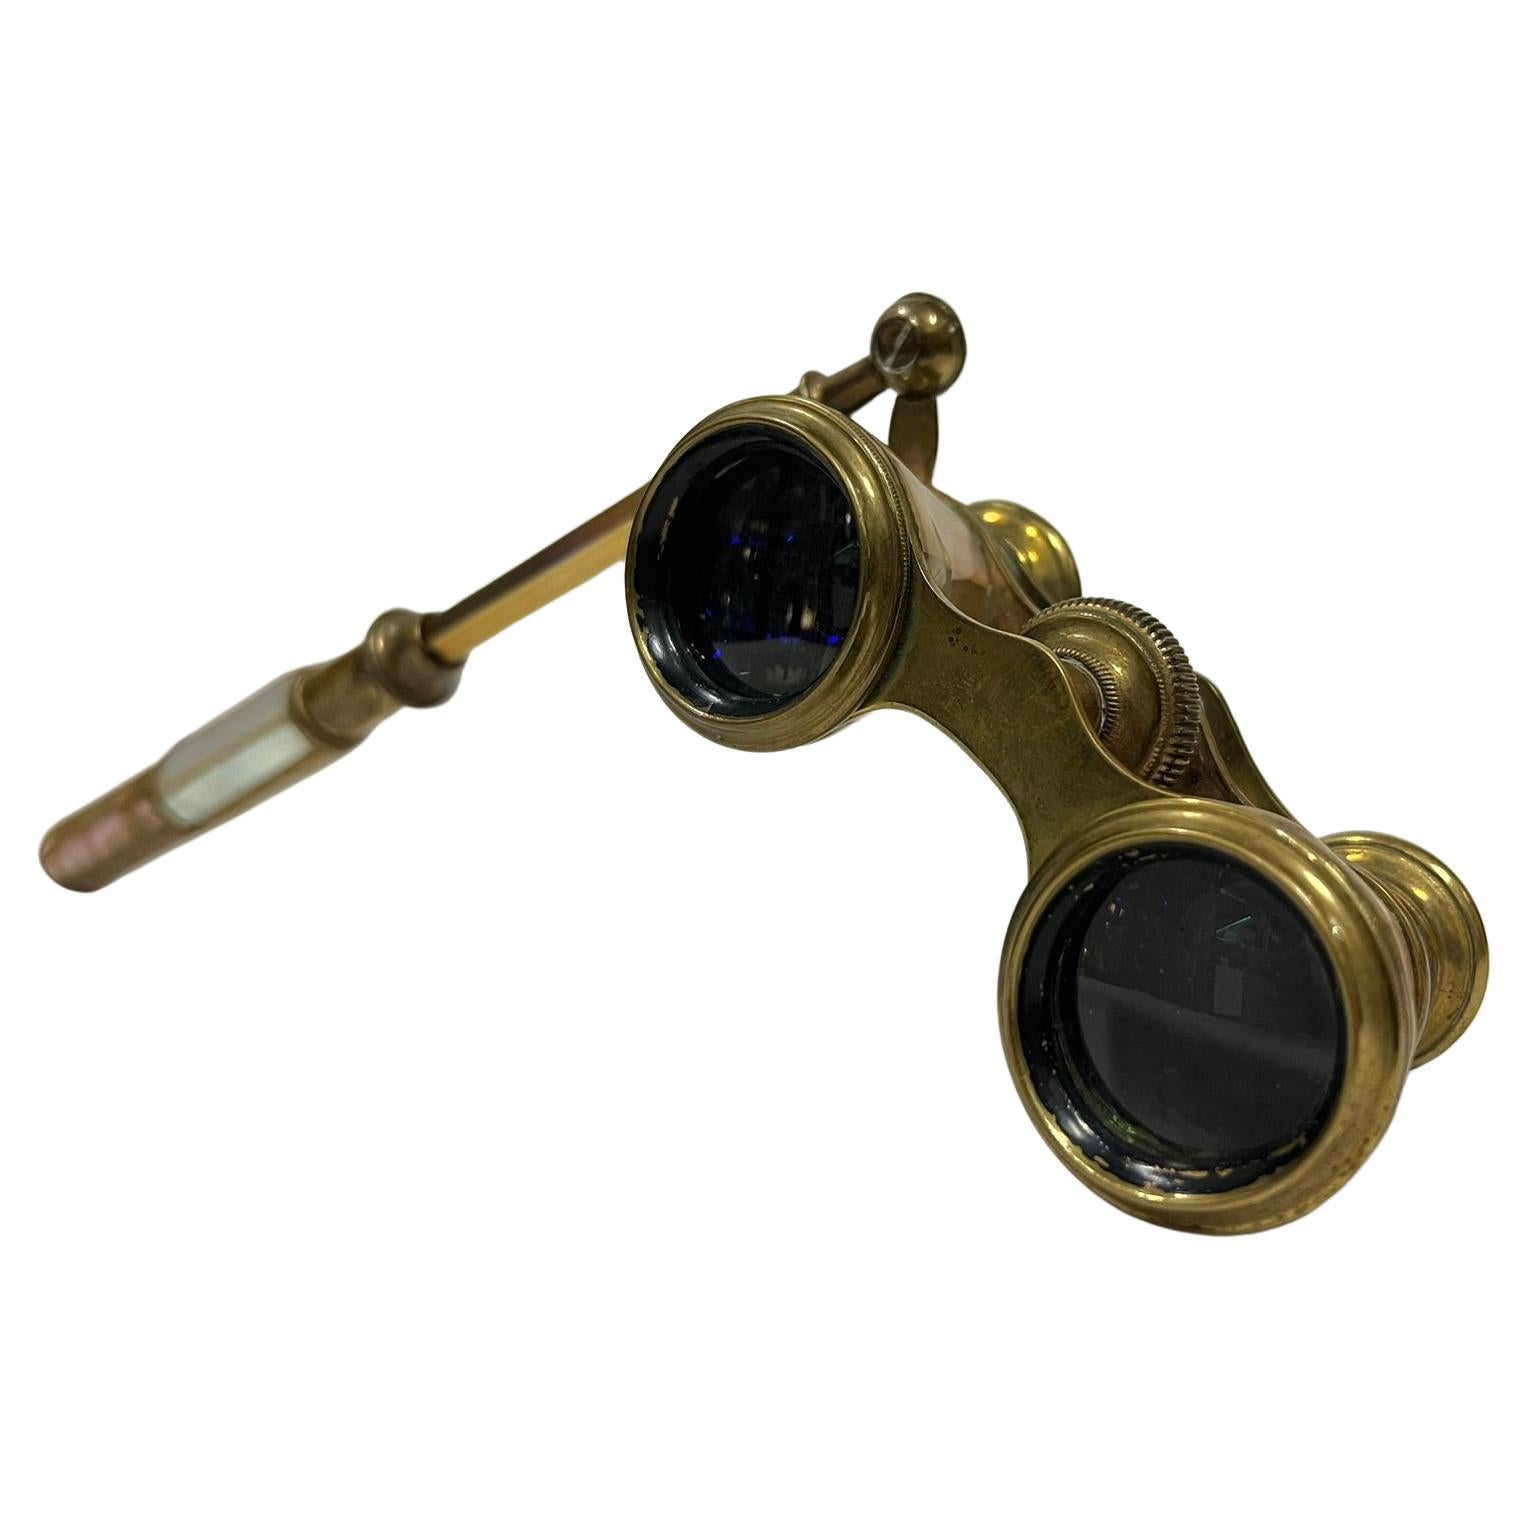 French opera glasses made of brass and mother of pearl around 1900, good original condition.